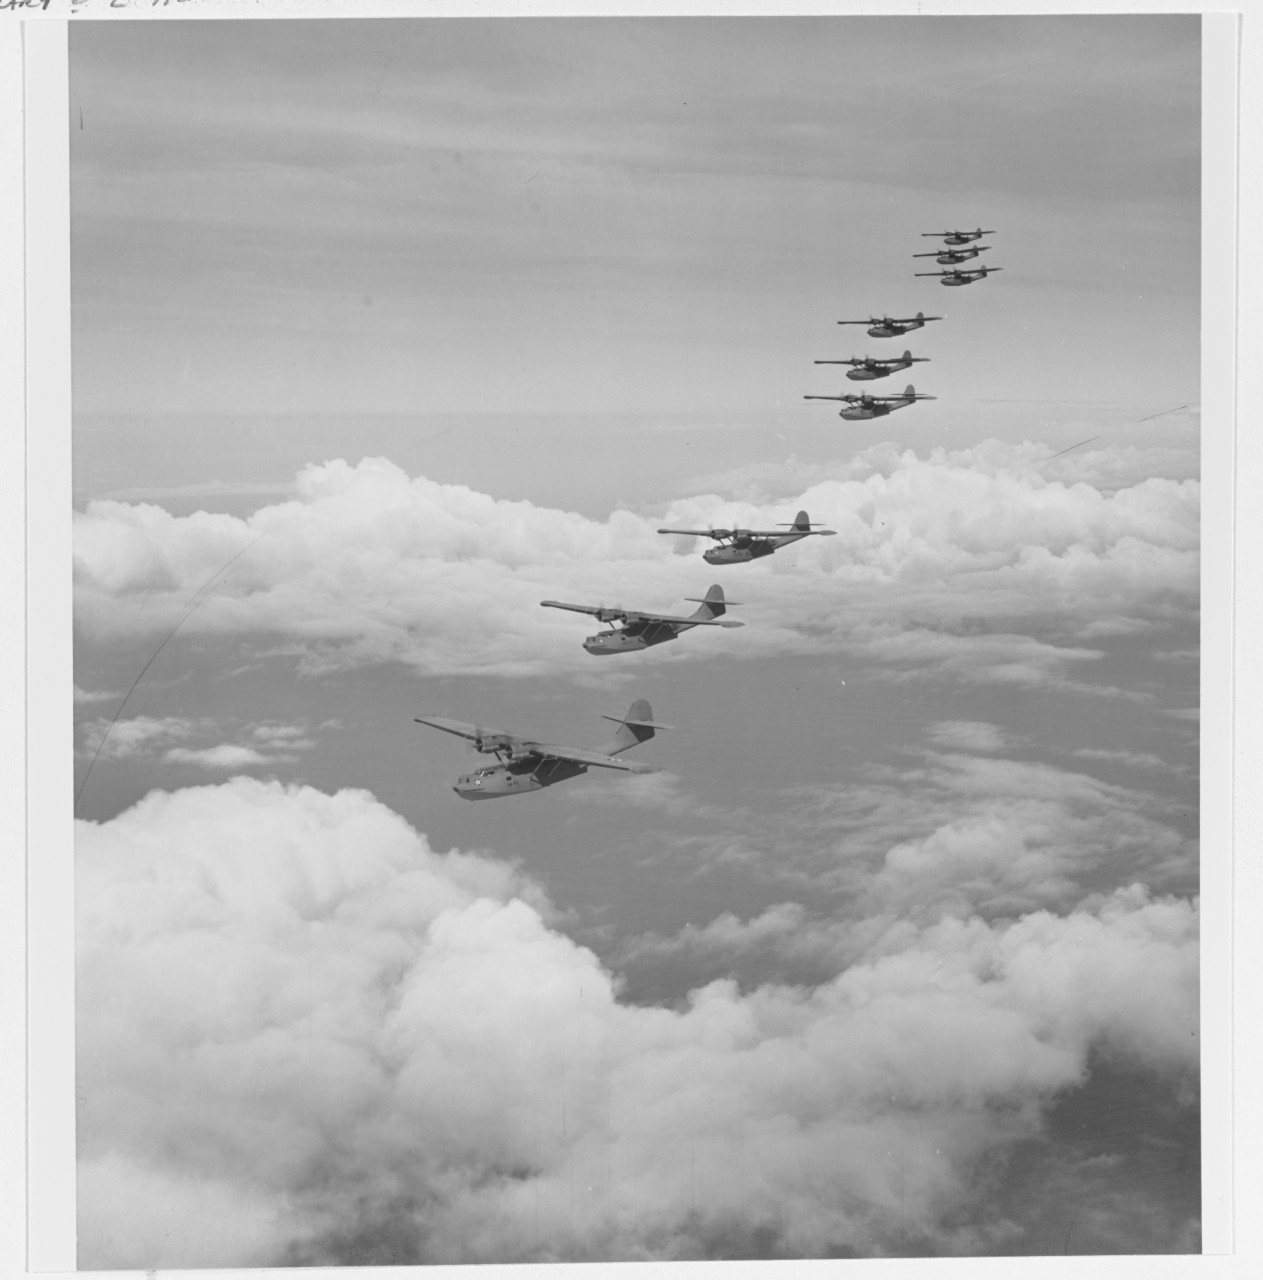 Photo #: 80-G-279382  Consolidated PBY-5 patrol bombers